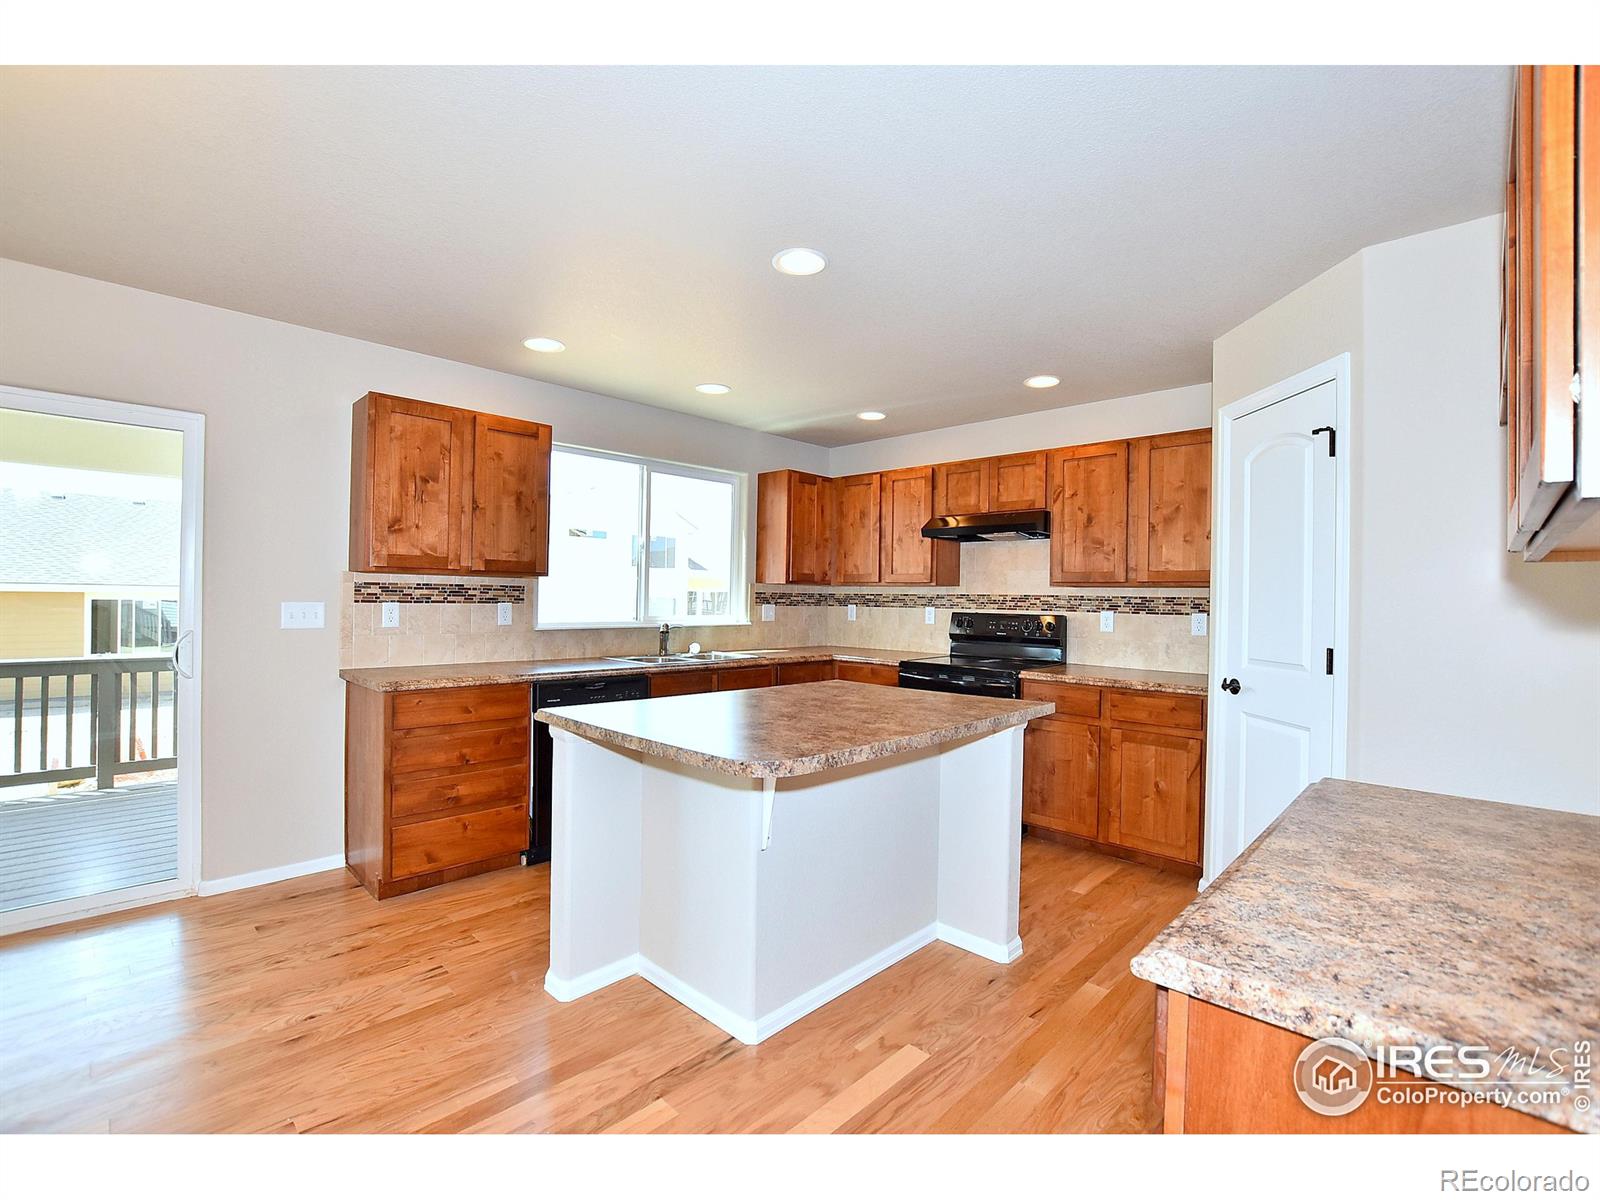 1616 104th, Greeley, CO